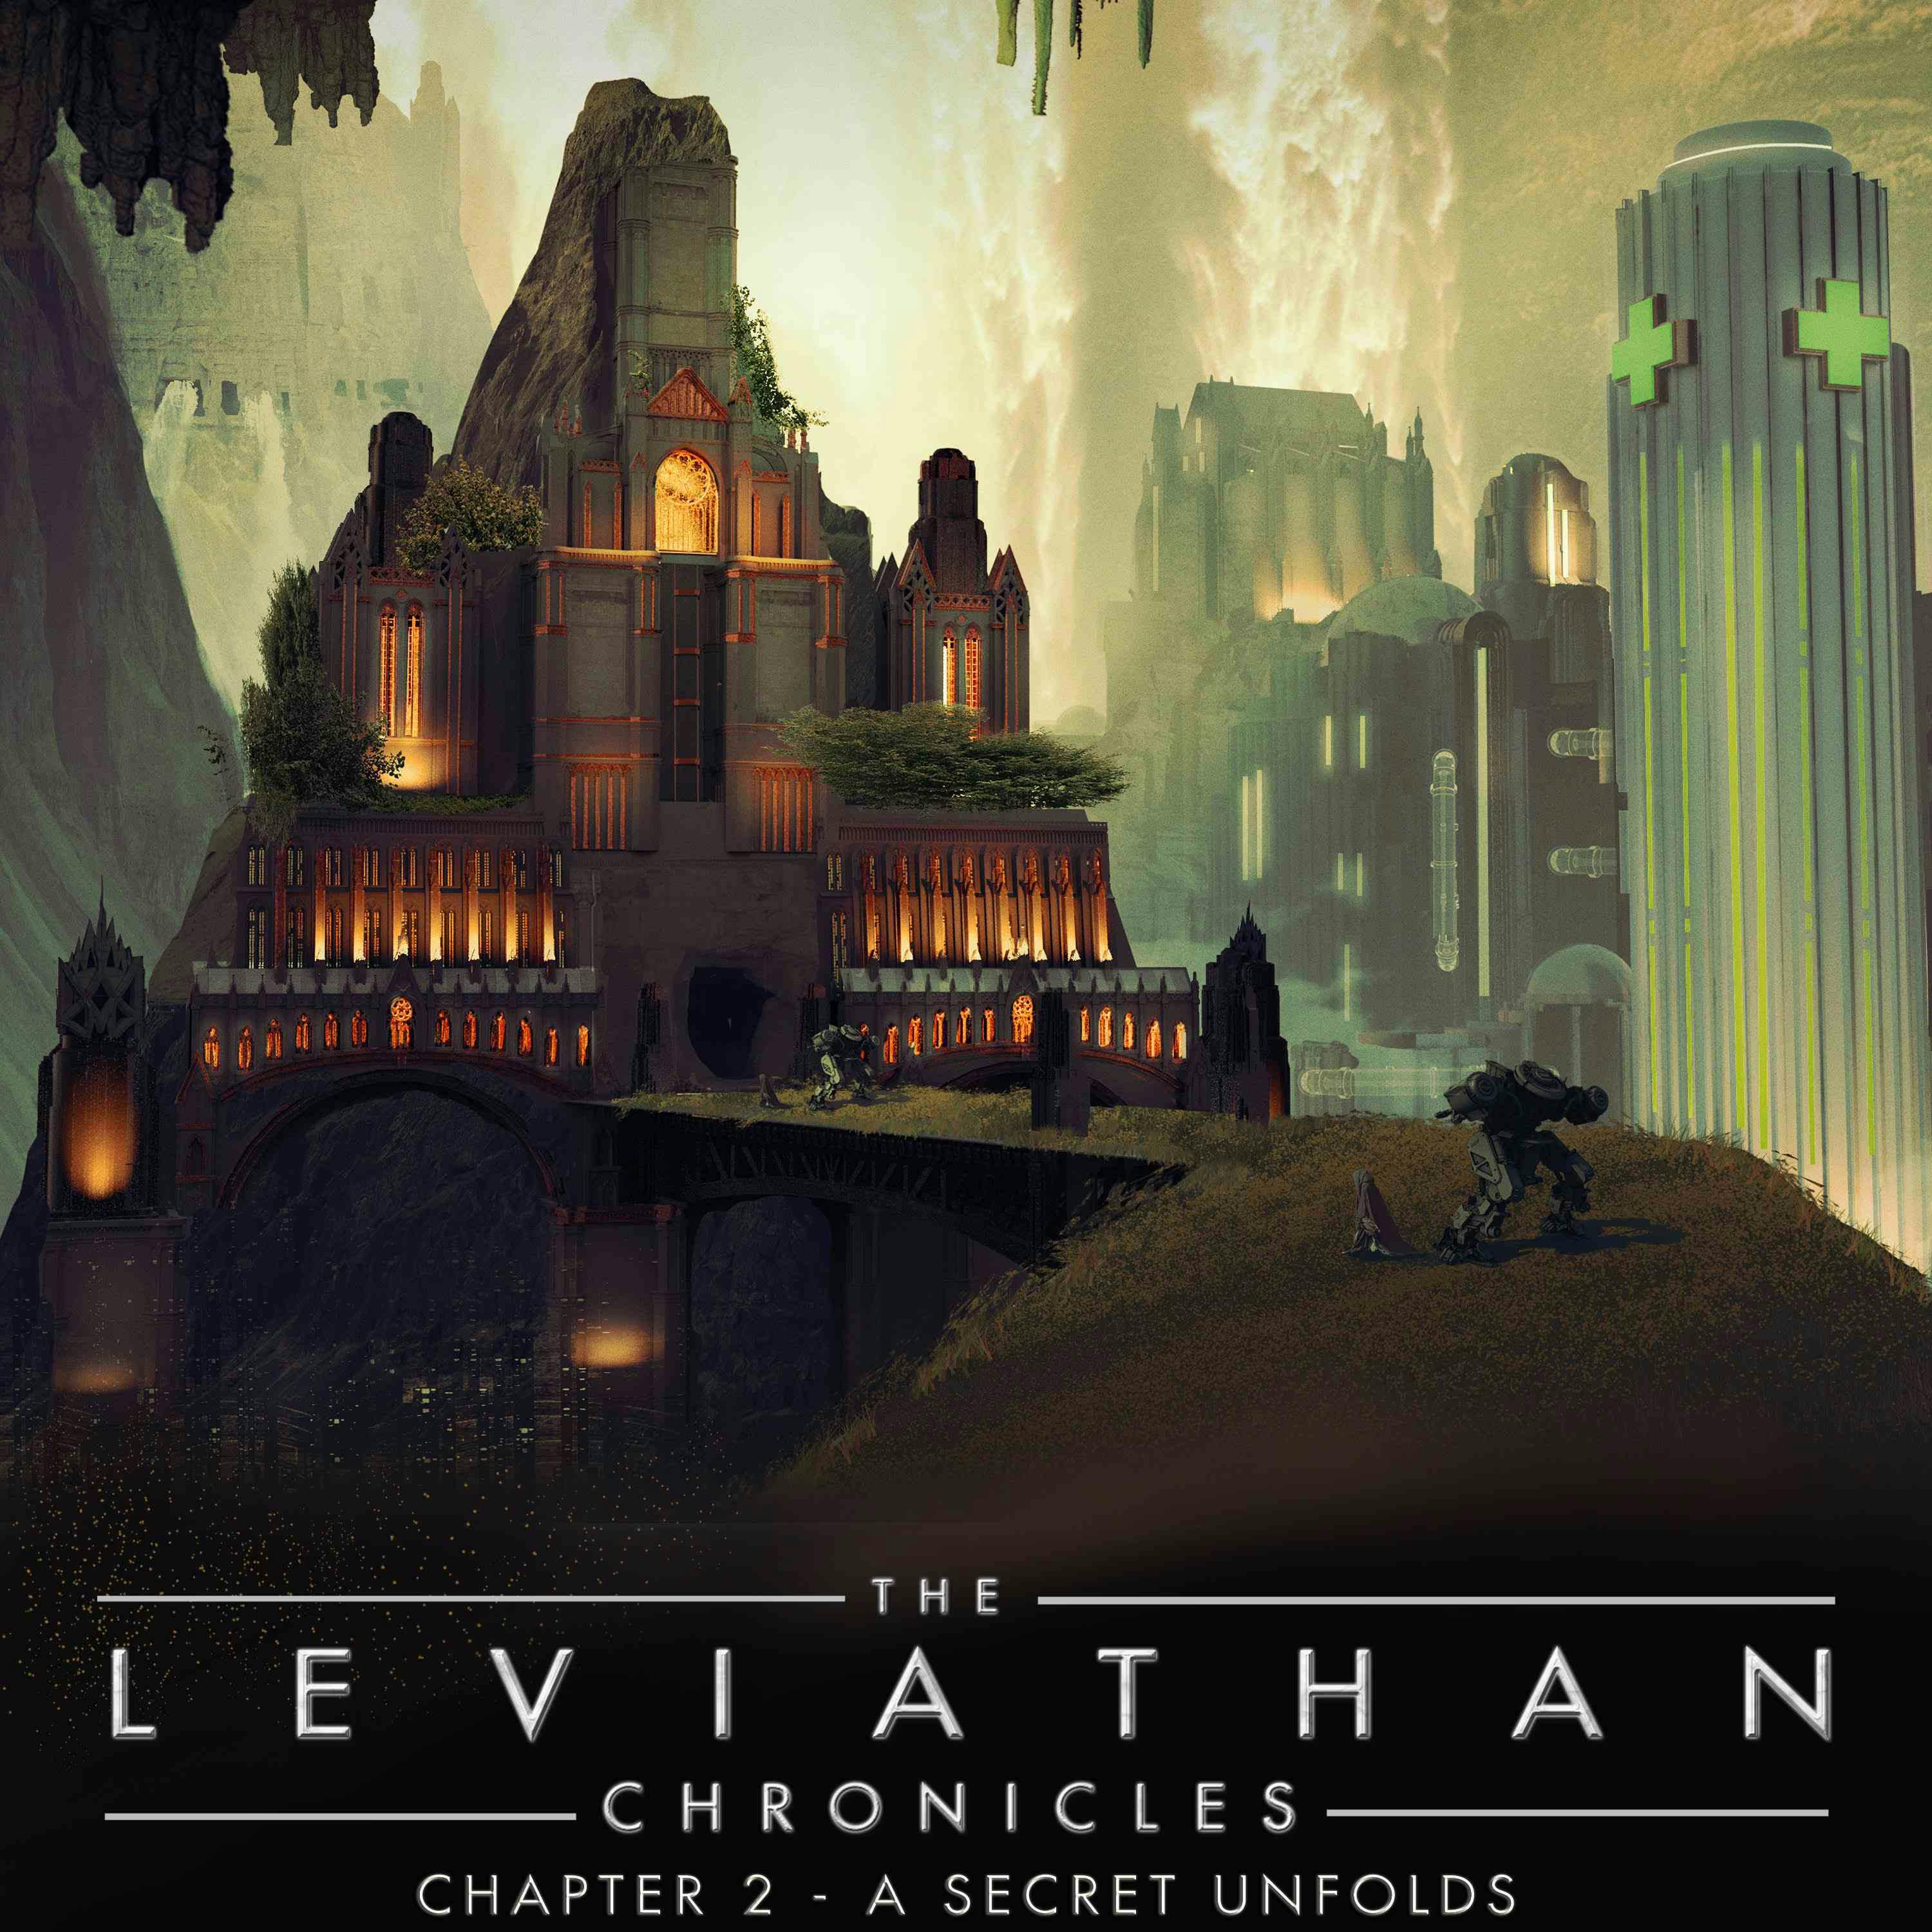 The Leviathan Chronicles | Chapter 2 - A Secret Unfolds